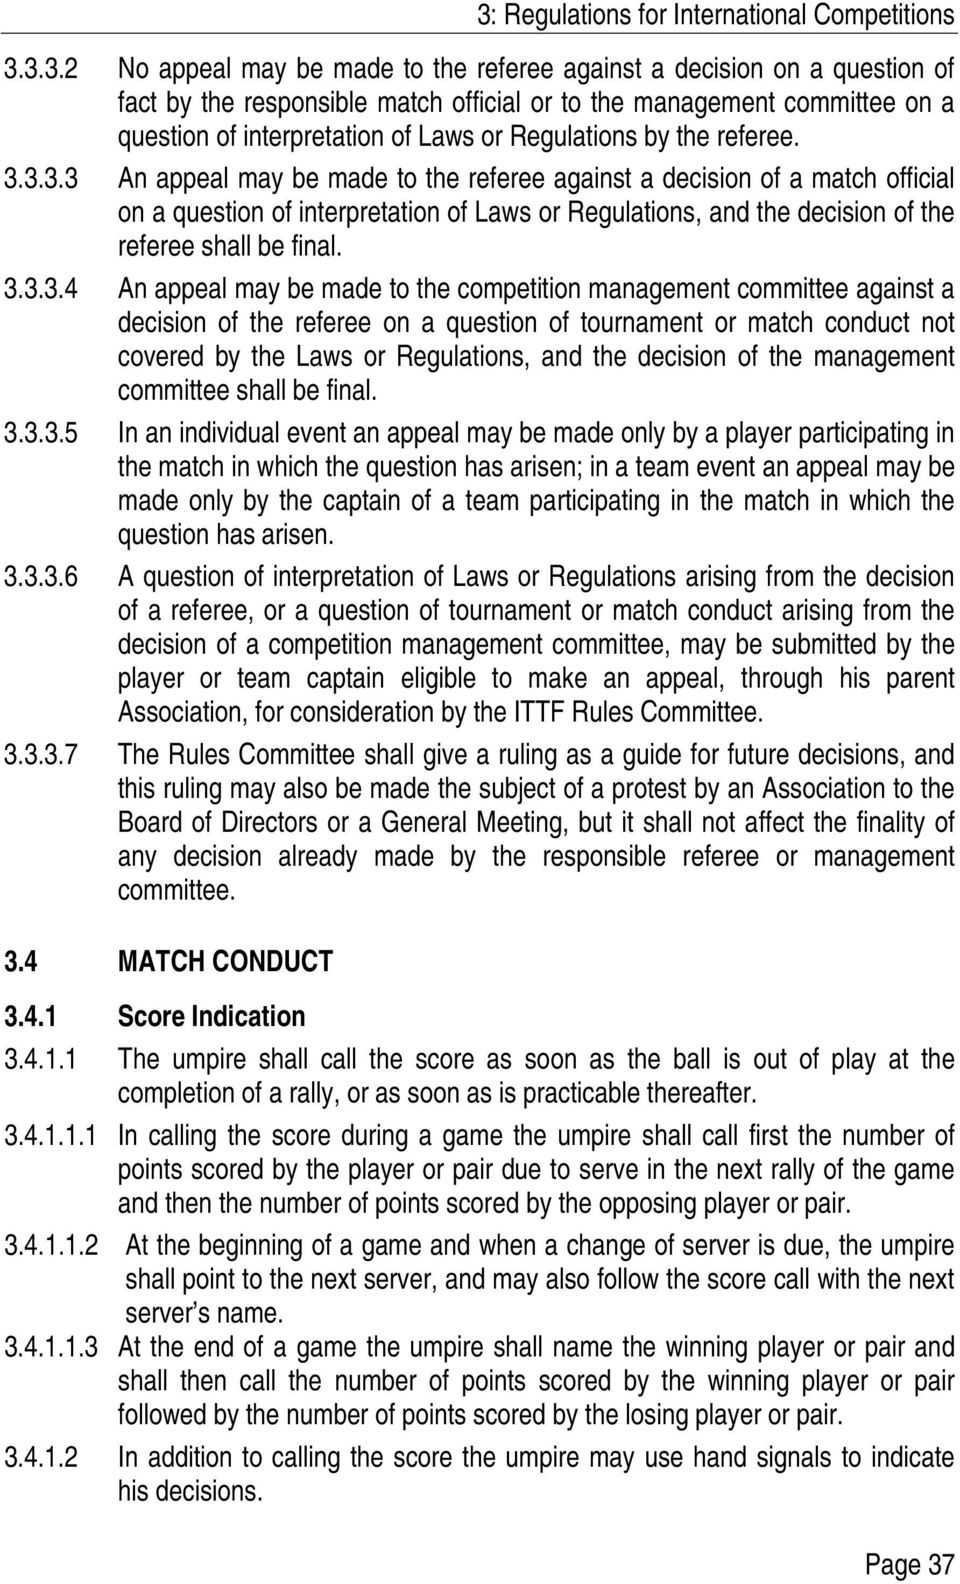 3.3.3 An appeal may be made to the referee against a decision of a match official on a question of interpretation of Laws or Regulations, and the decision of the referee shall be final. 3.3.3.4 An